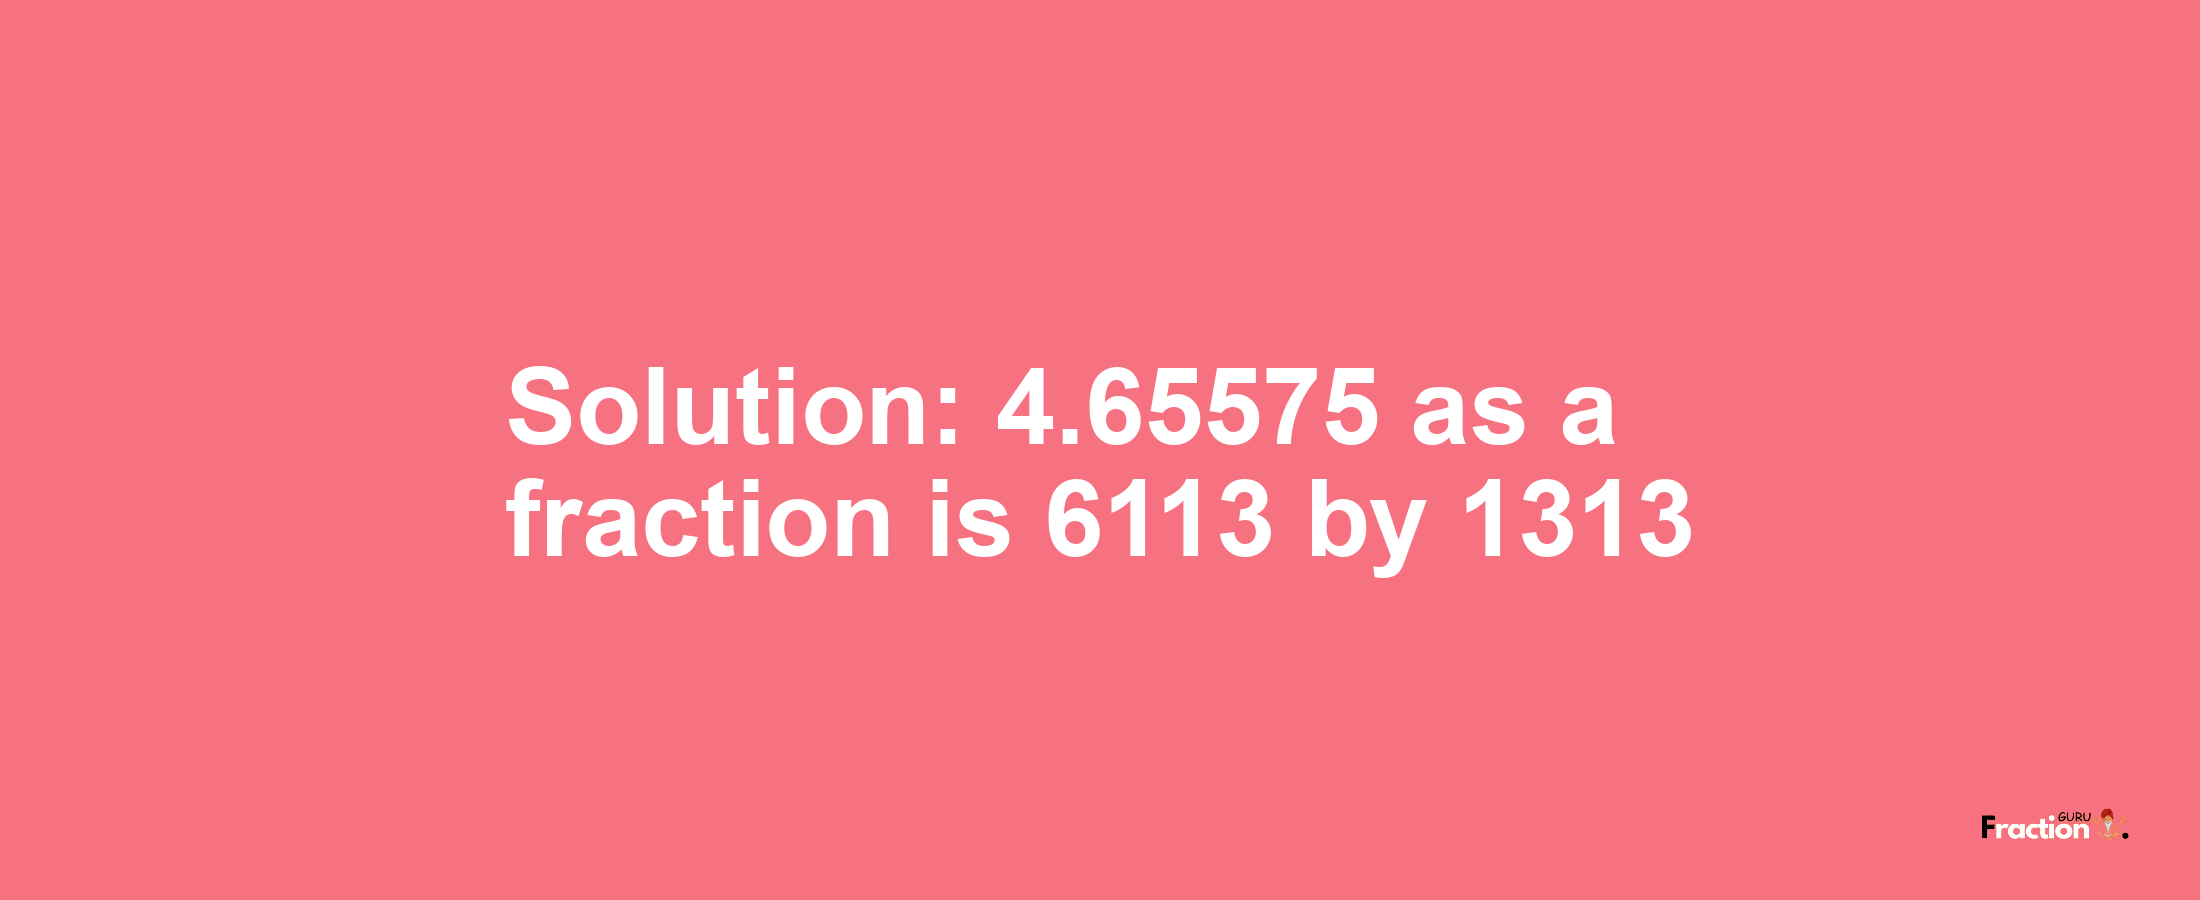 Solution:4.65575 as a fraction is 6113/1313